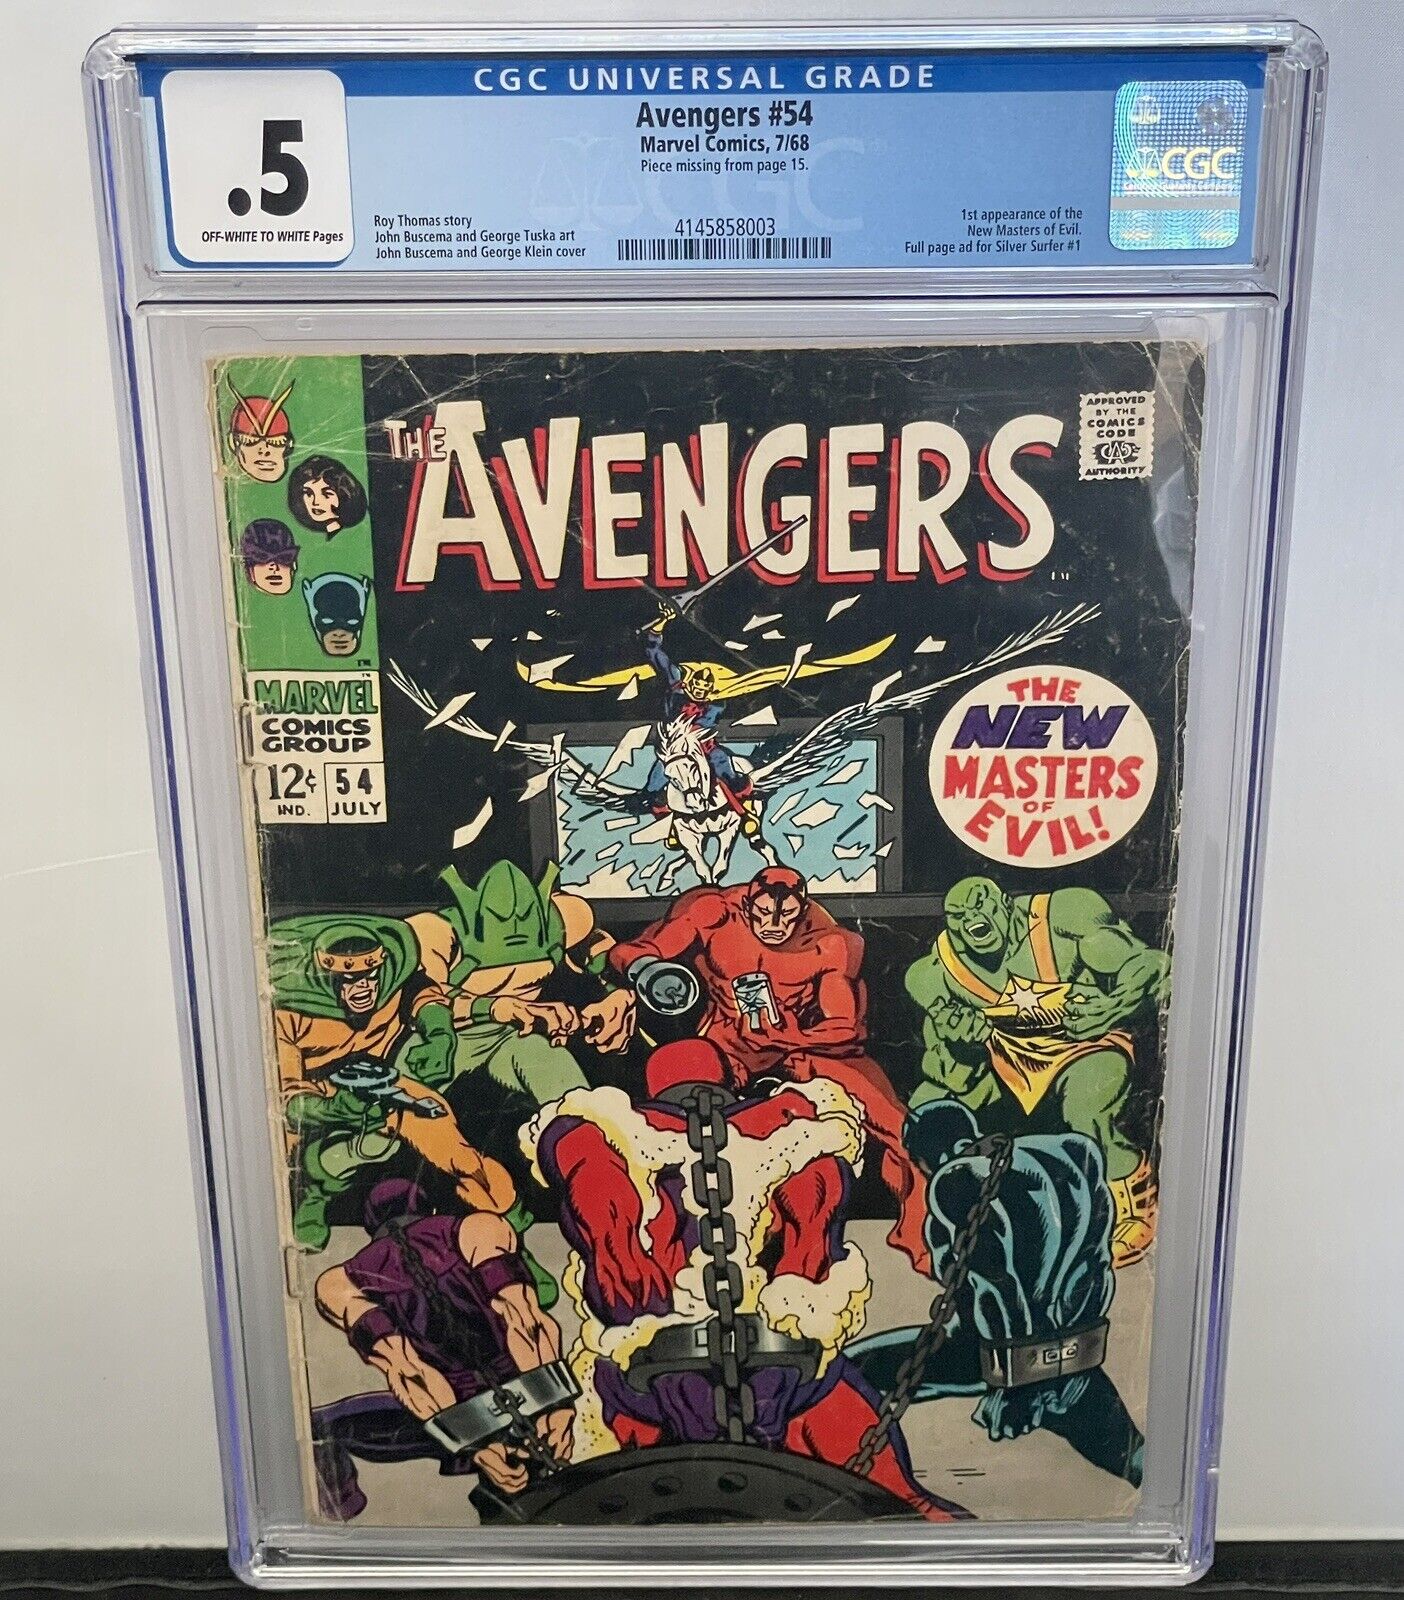 Avengers #54 CGC 0.5 1st appearance of the New Masters of Evil 1968